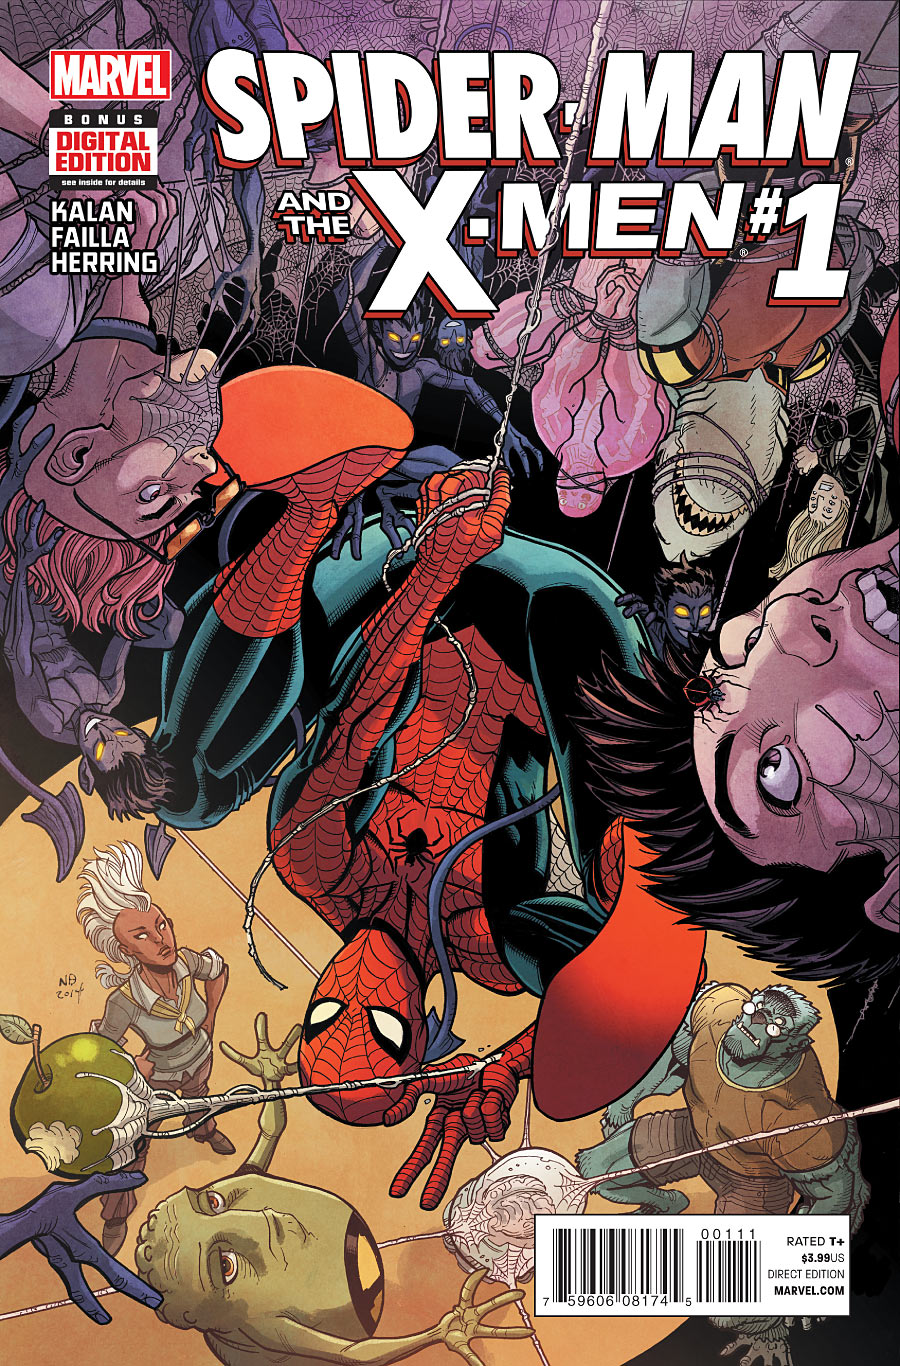 SPIDER-MAN AND THE X-MEN #1